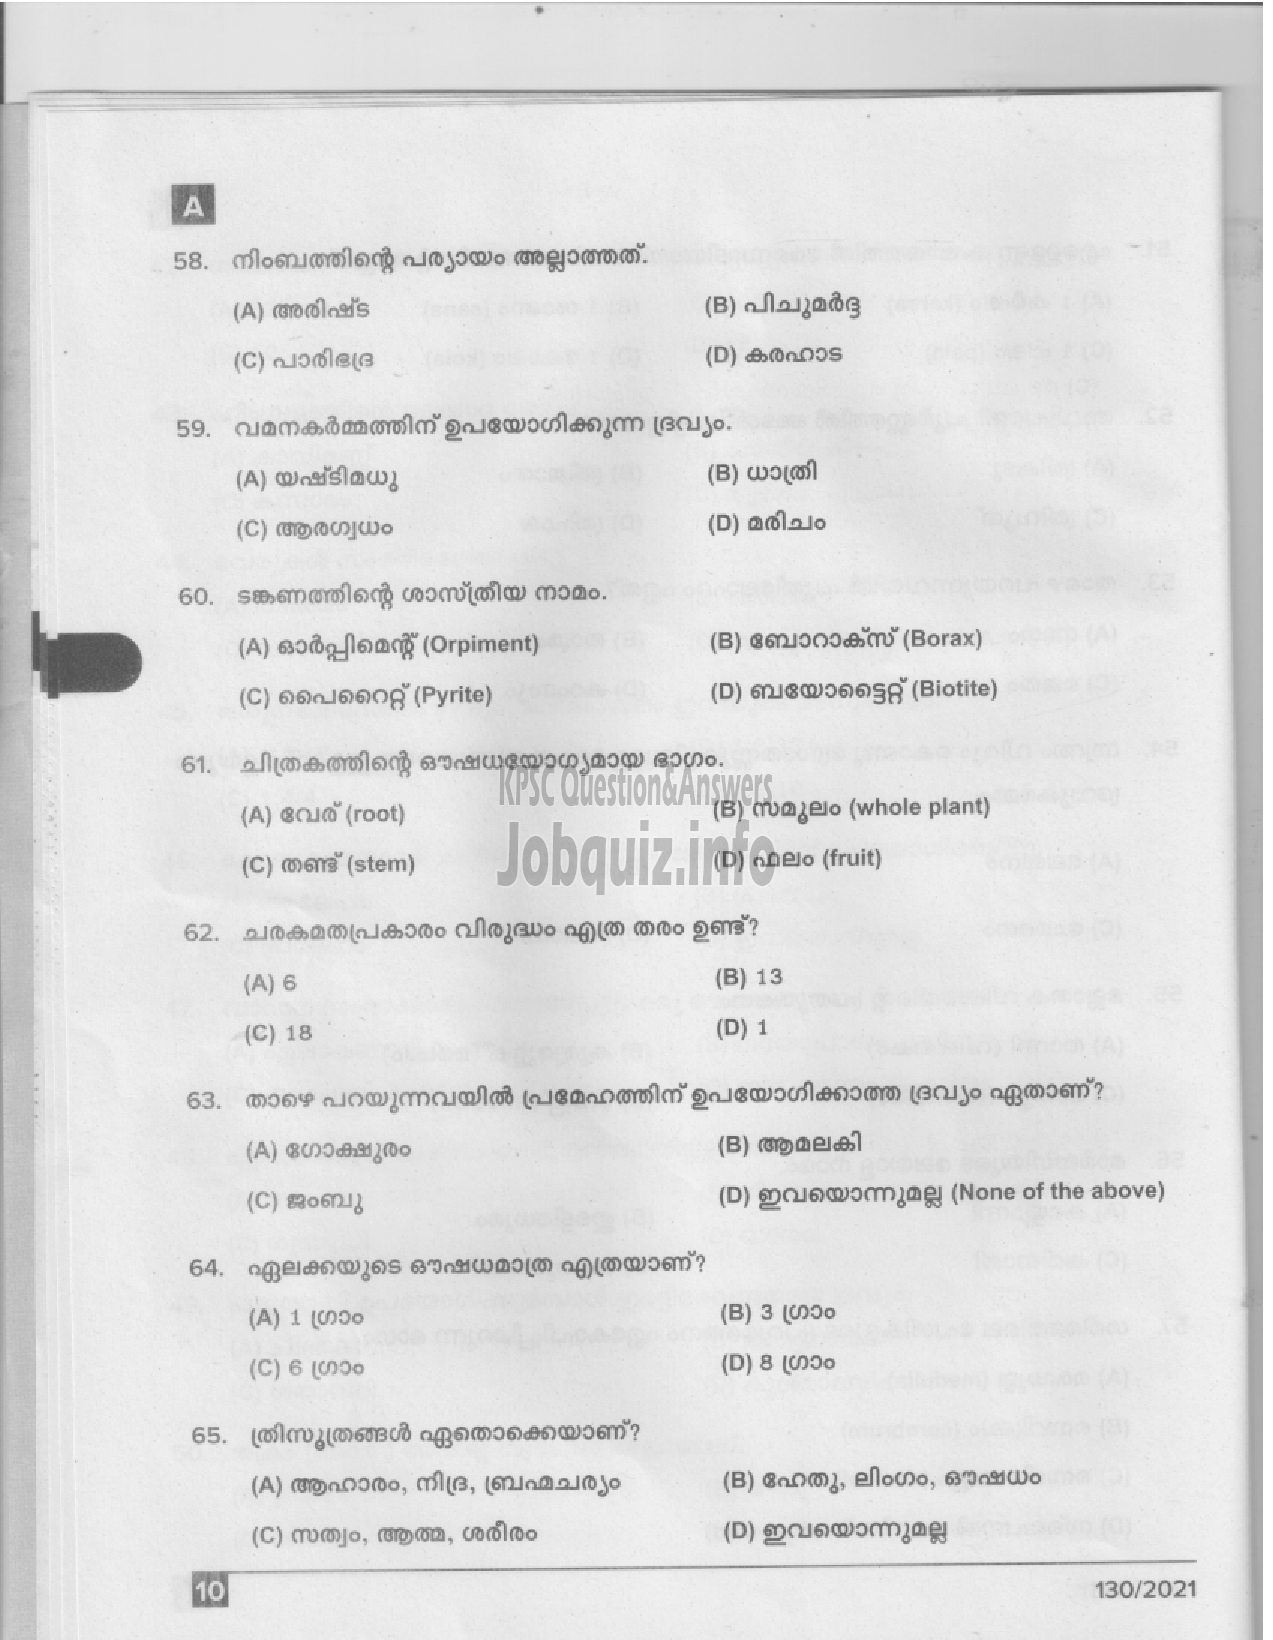 Kerala PSC Question Paper - Pharmacist Gr II (Ayurveda) - ISM/ IMS/ Ayurveda Colleges-8